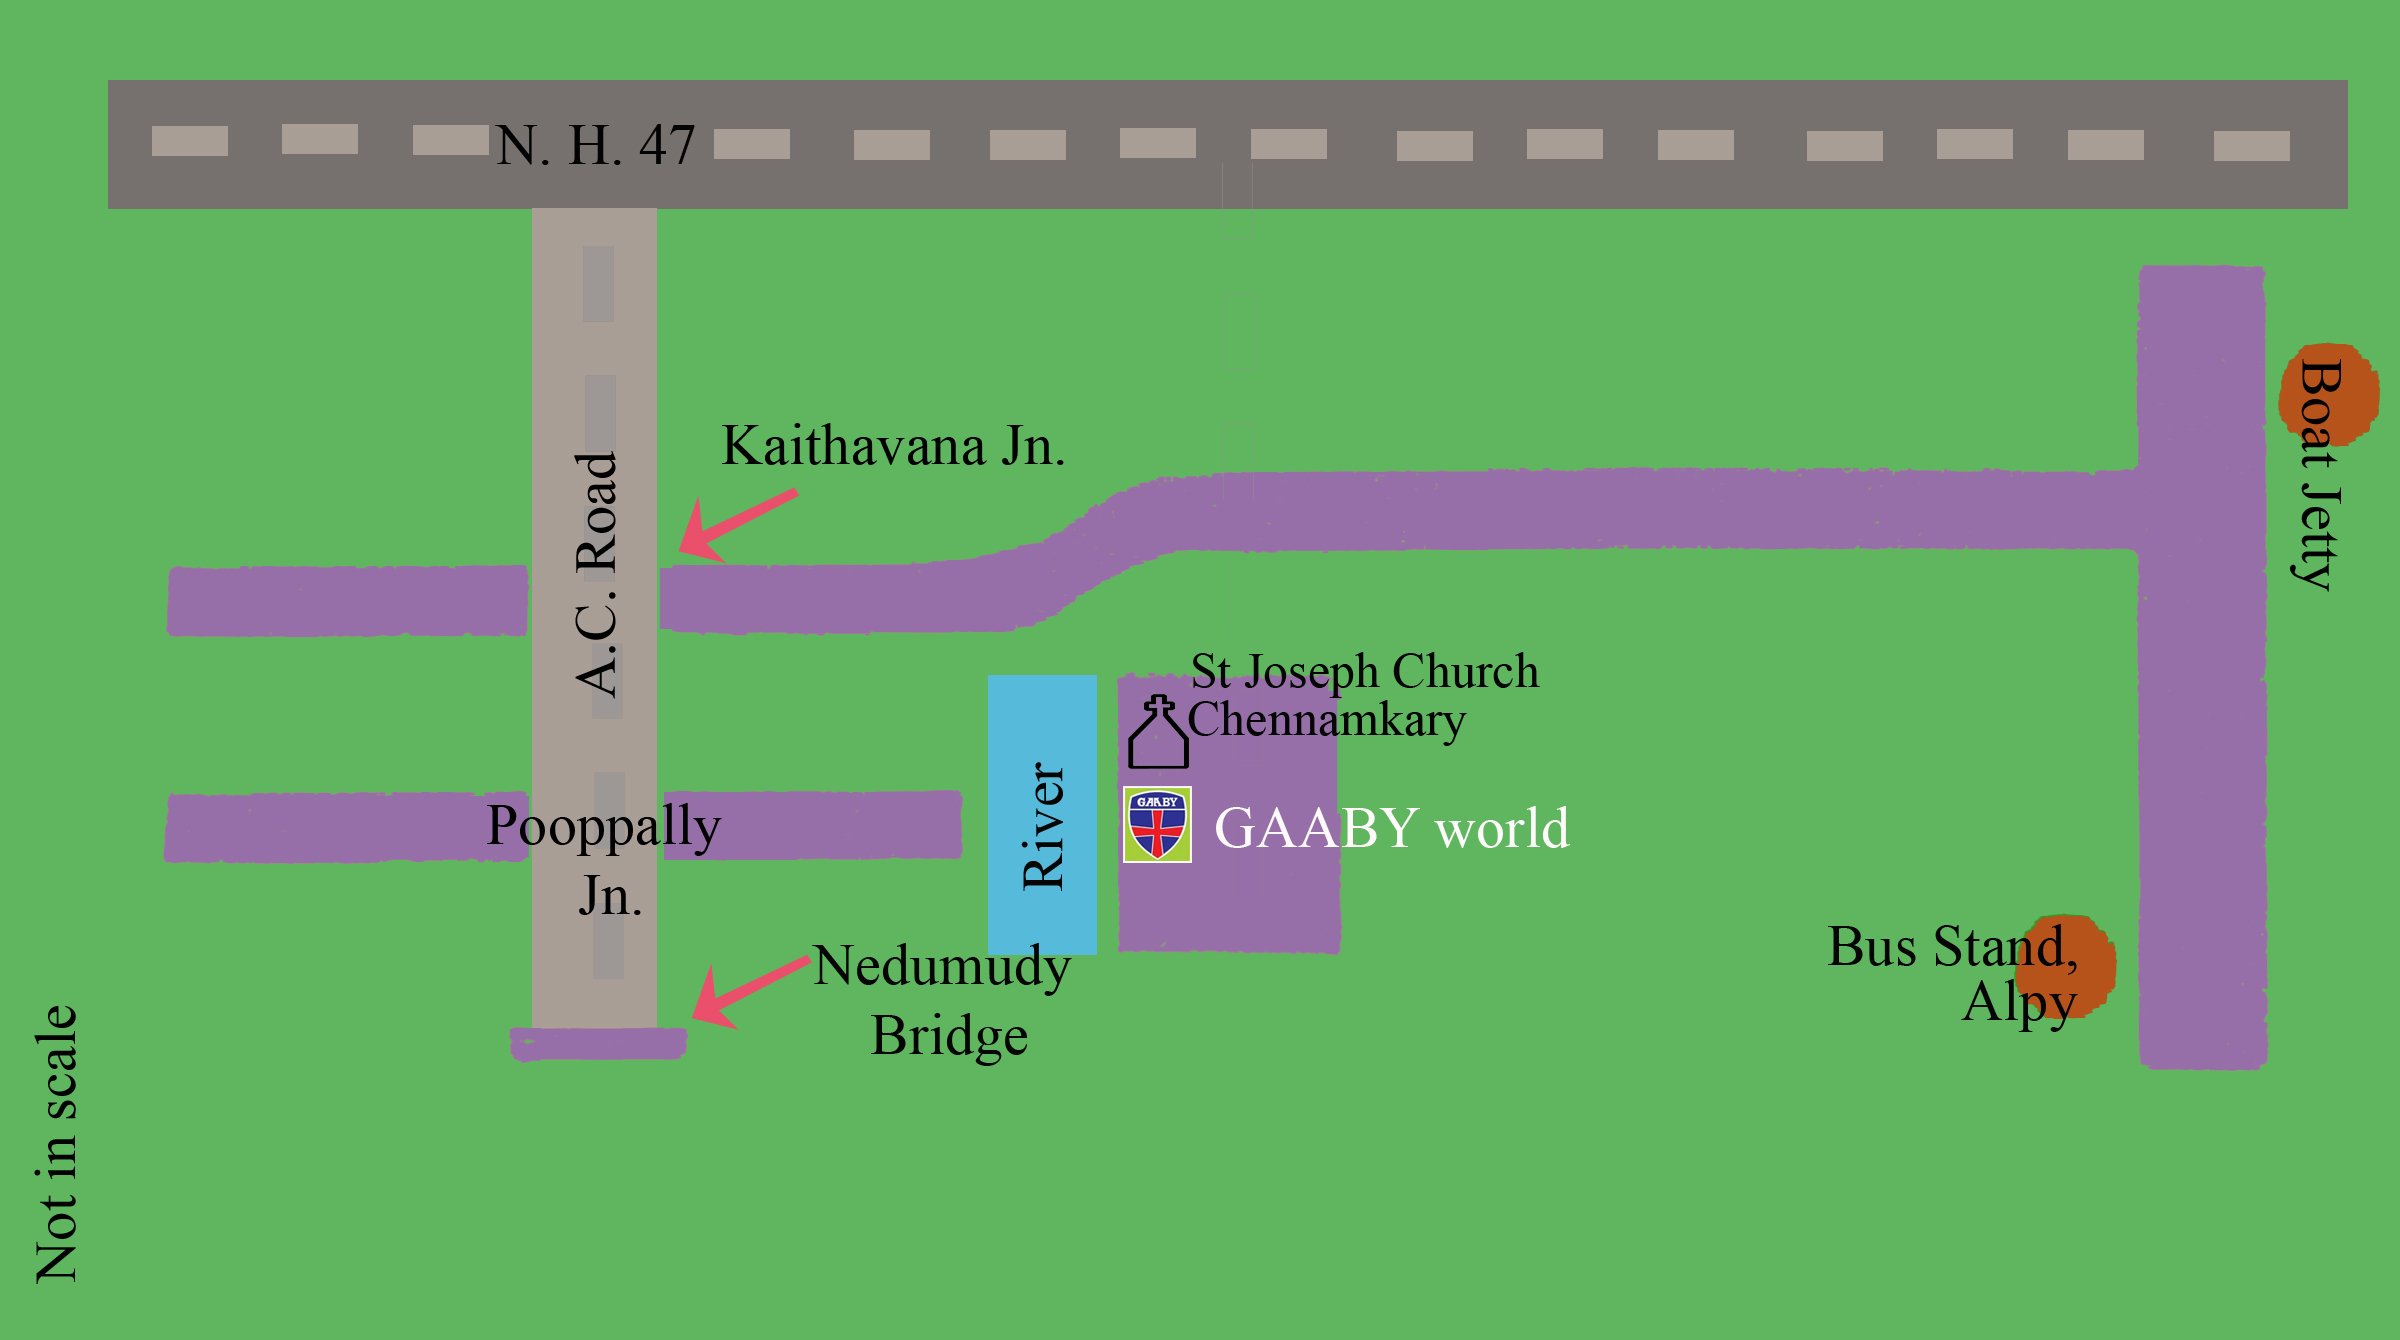 Details about location of Gaabyworld